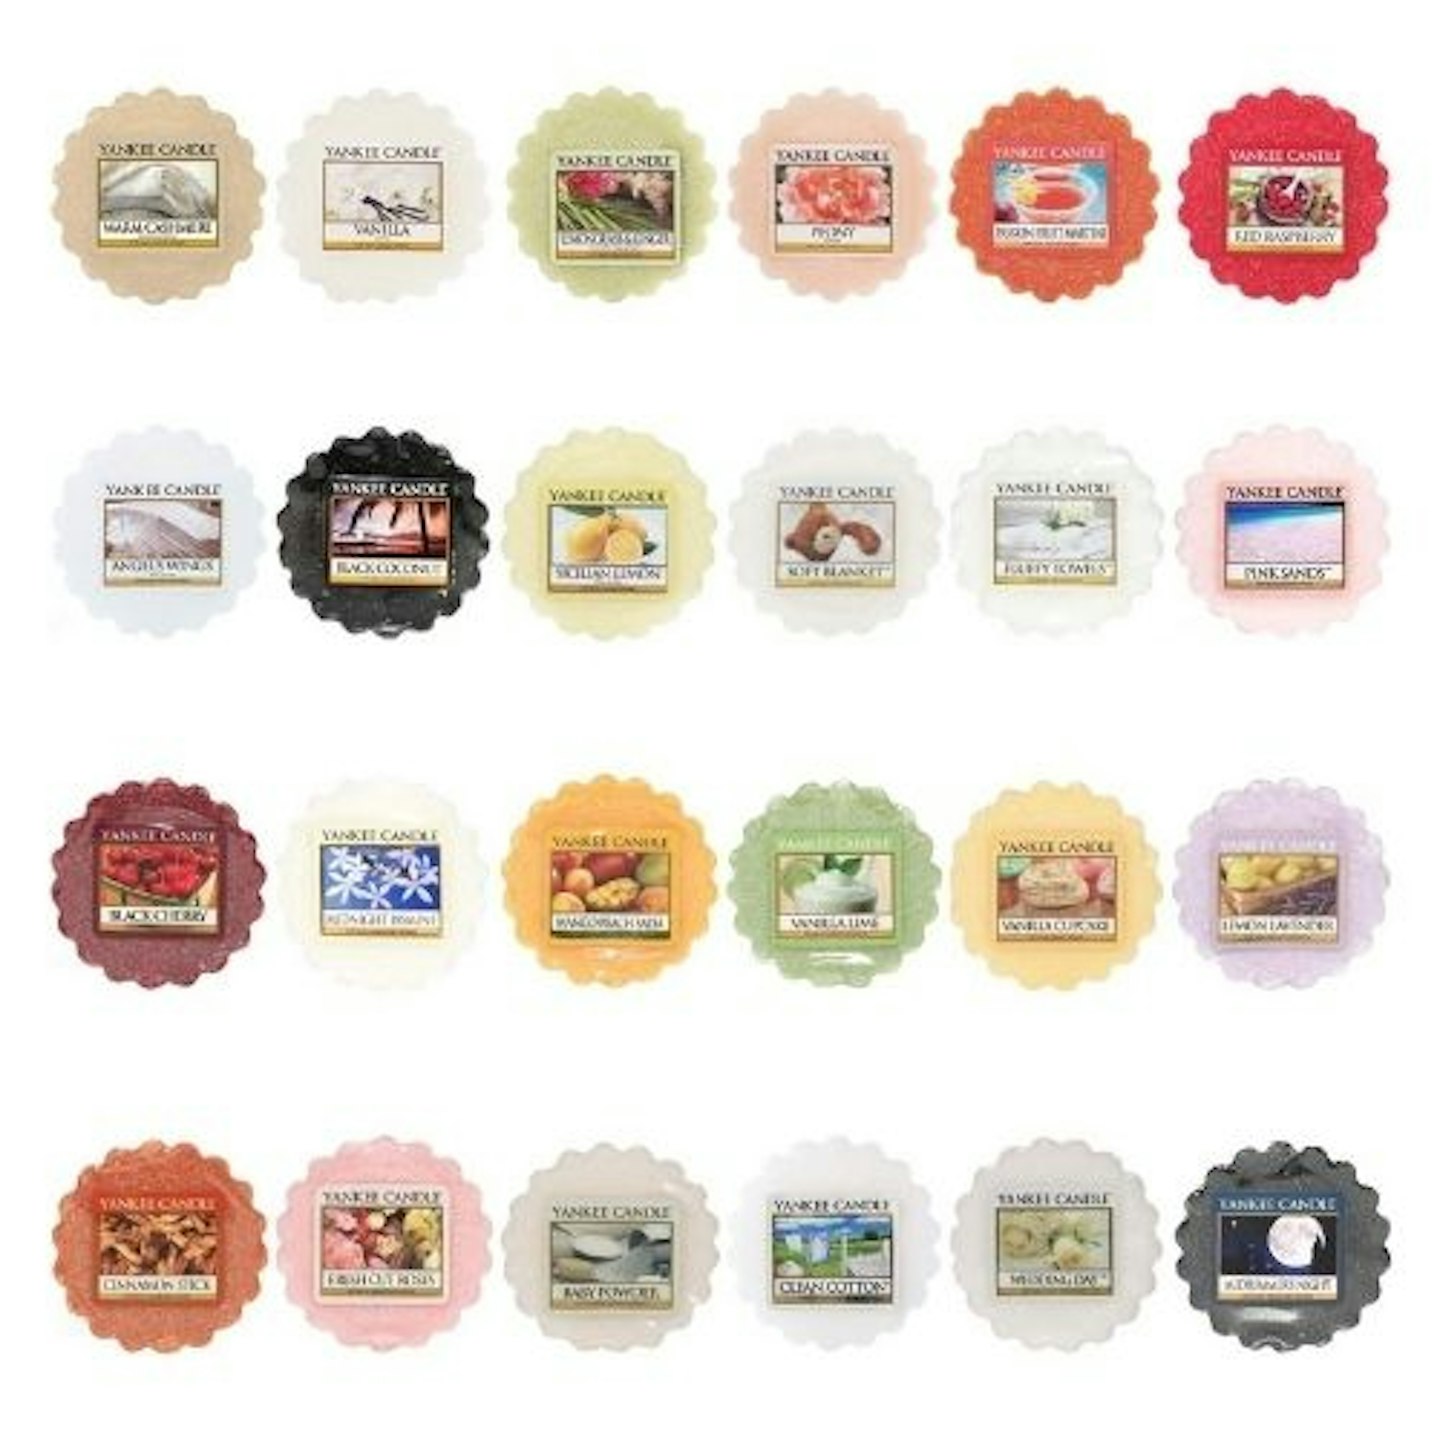 Yankee Candle Wax Melts Reviews - March 2023  Yankee candle wax melts,  Candle wax melts, Wax melts